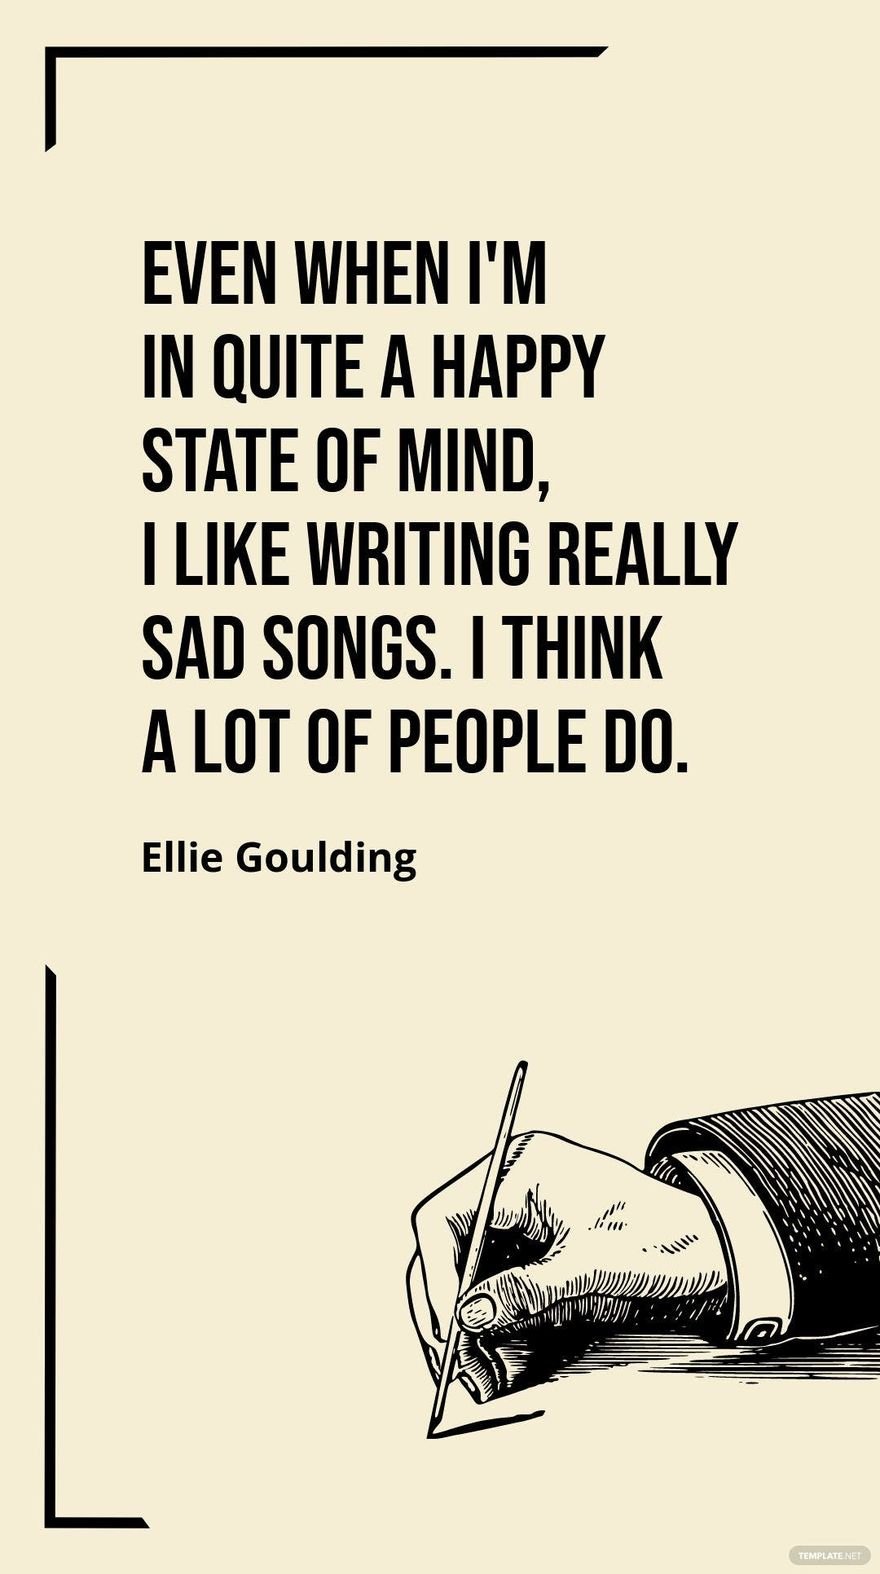 Ellie Goulding - Even when I'm in quite a happy state of mind, I like writing really sad songs. I think a lot of people do.